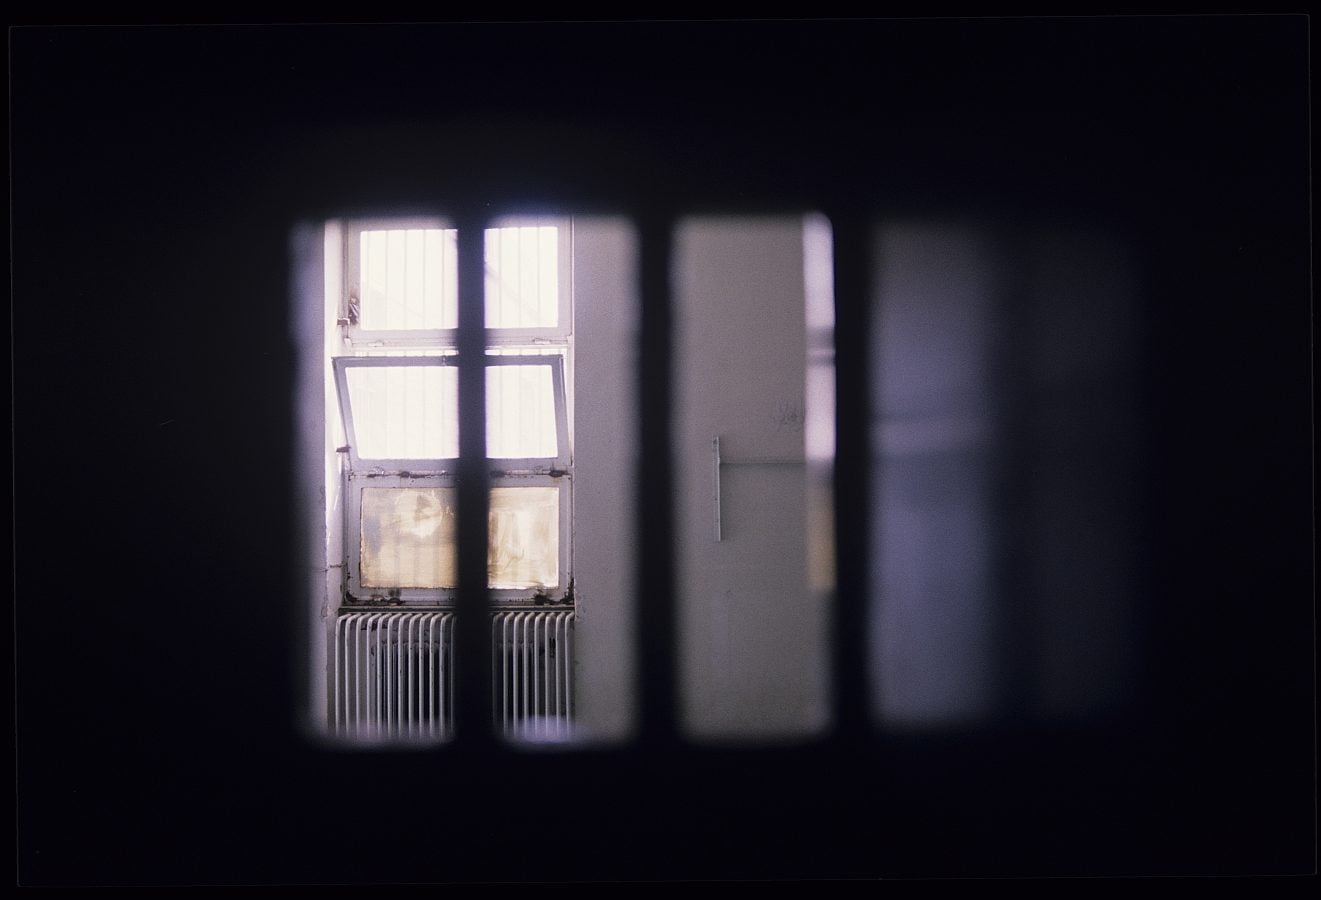 The image of a dark, empty cell inside the political ward at the high security Evin Prison in Tehran, Iran, 10th February 1986.